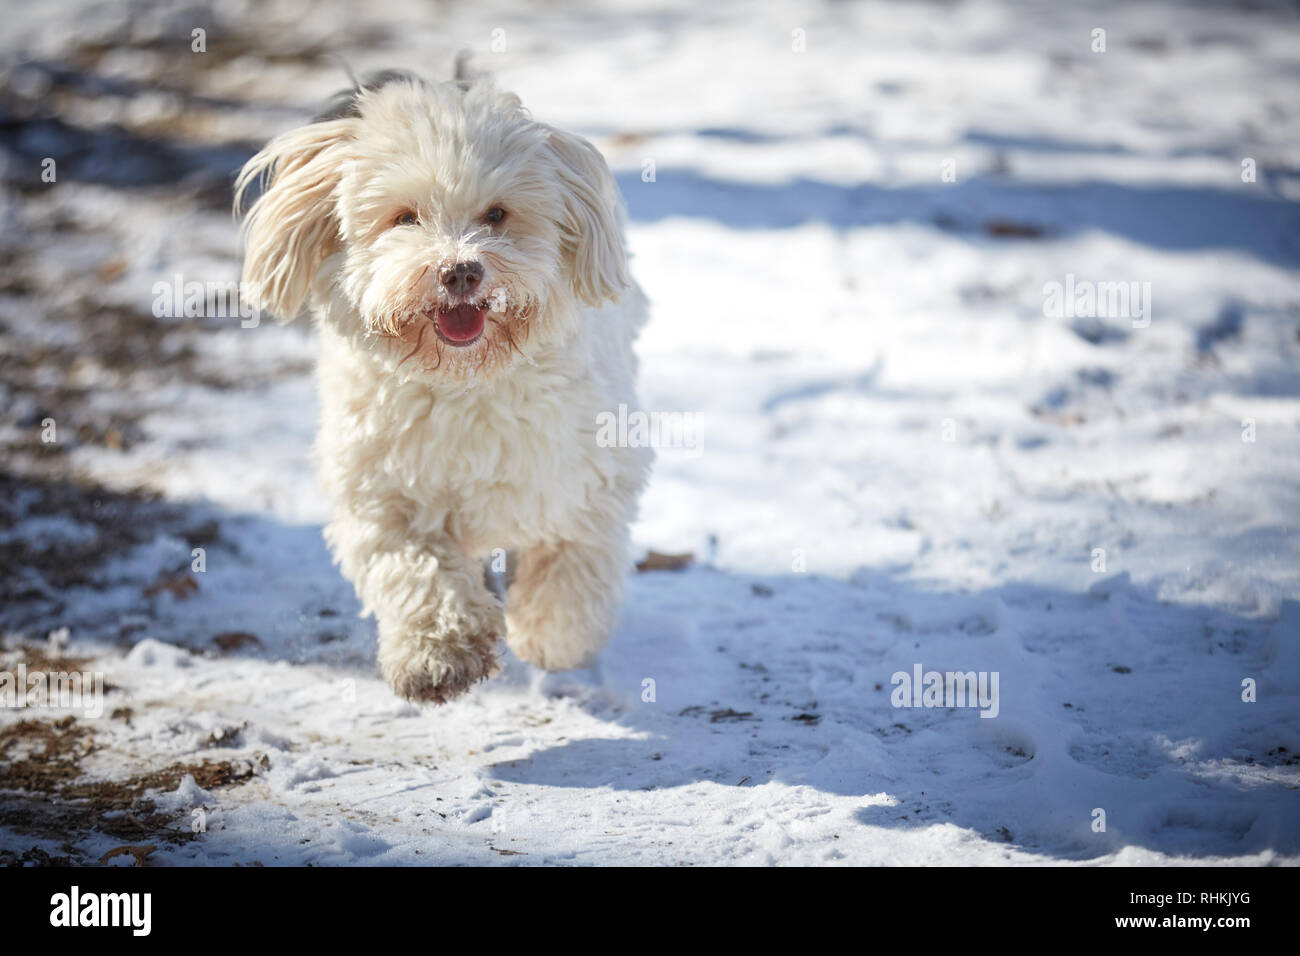 Havanese dog playing in the snow with ball Stock Photo